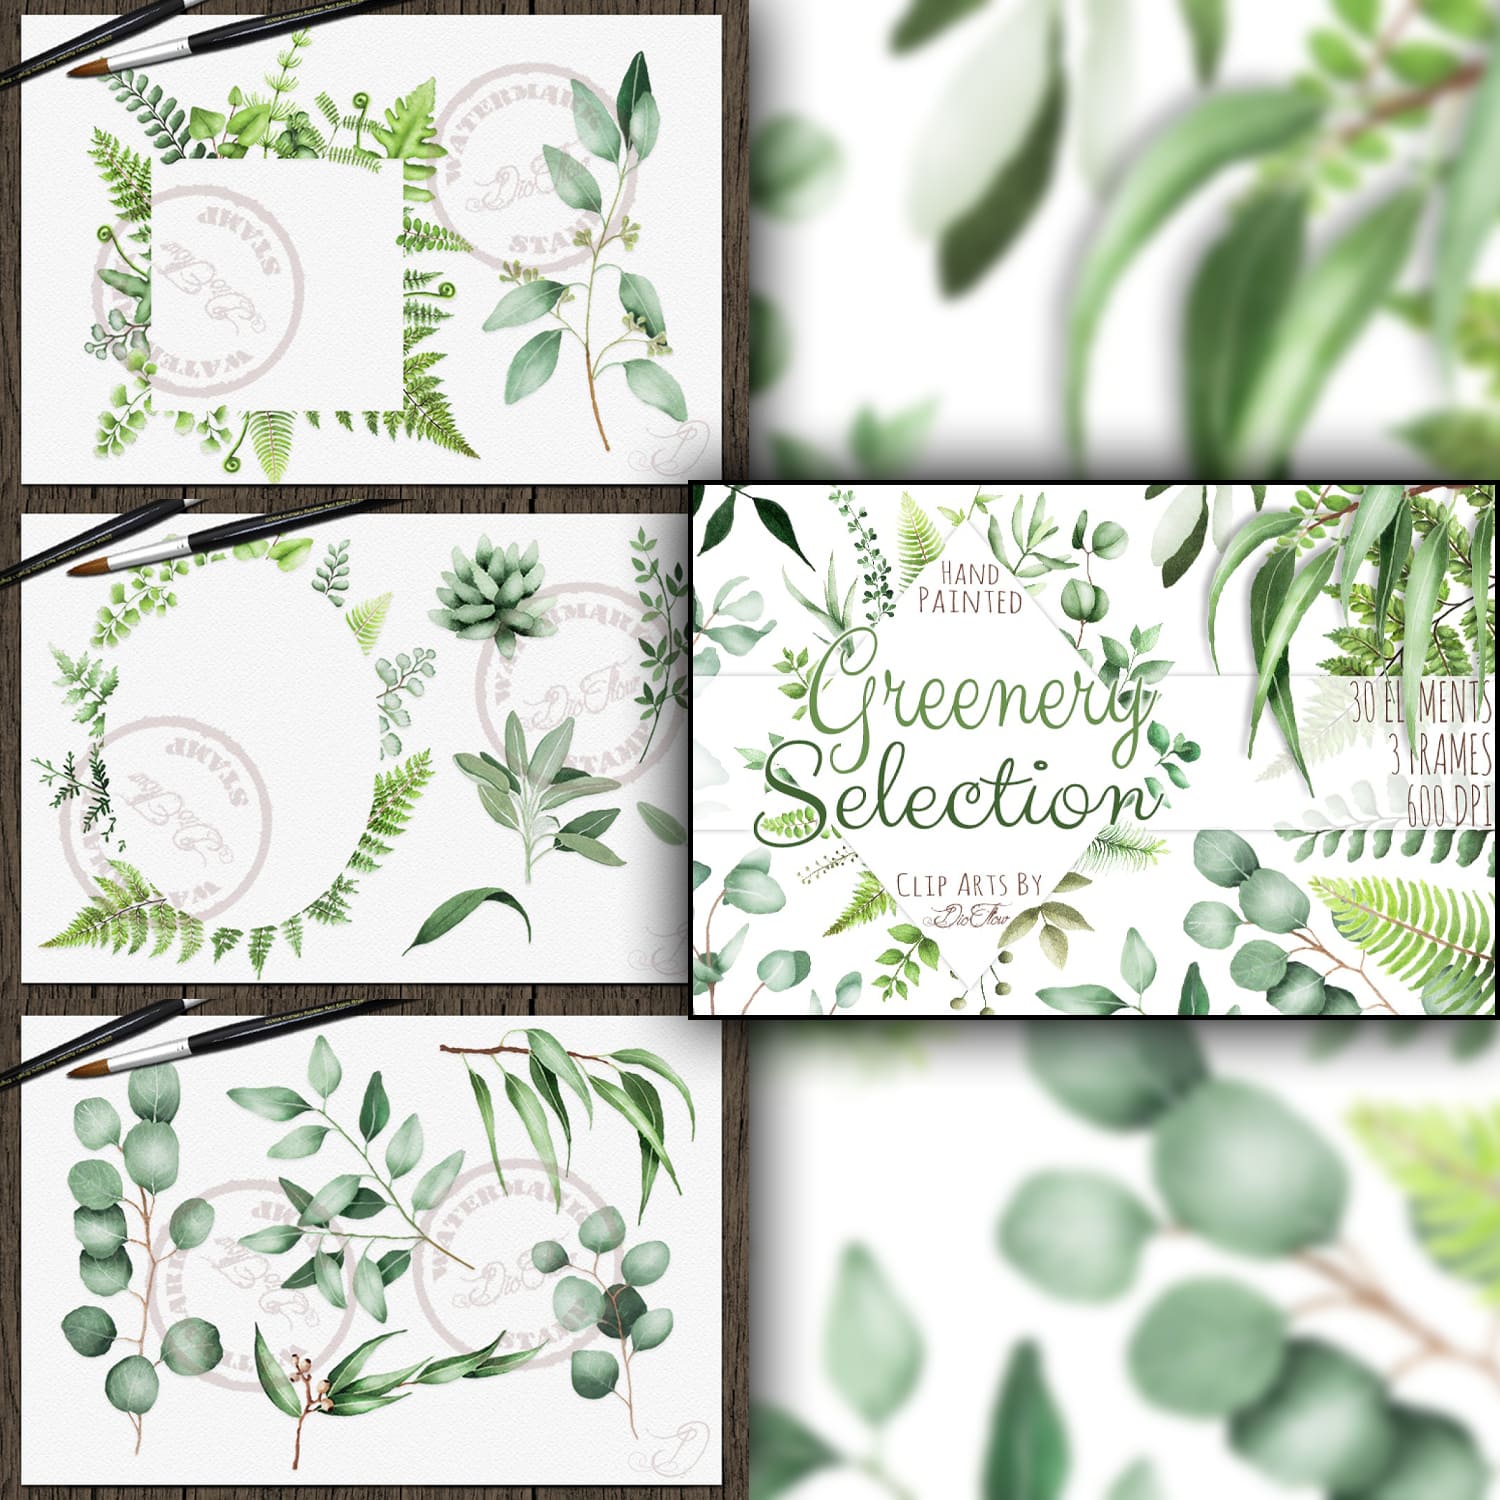 Greenery Watercolor Clipart Leaves cover.